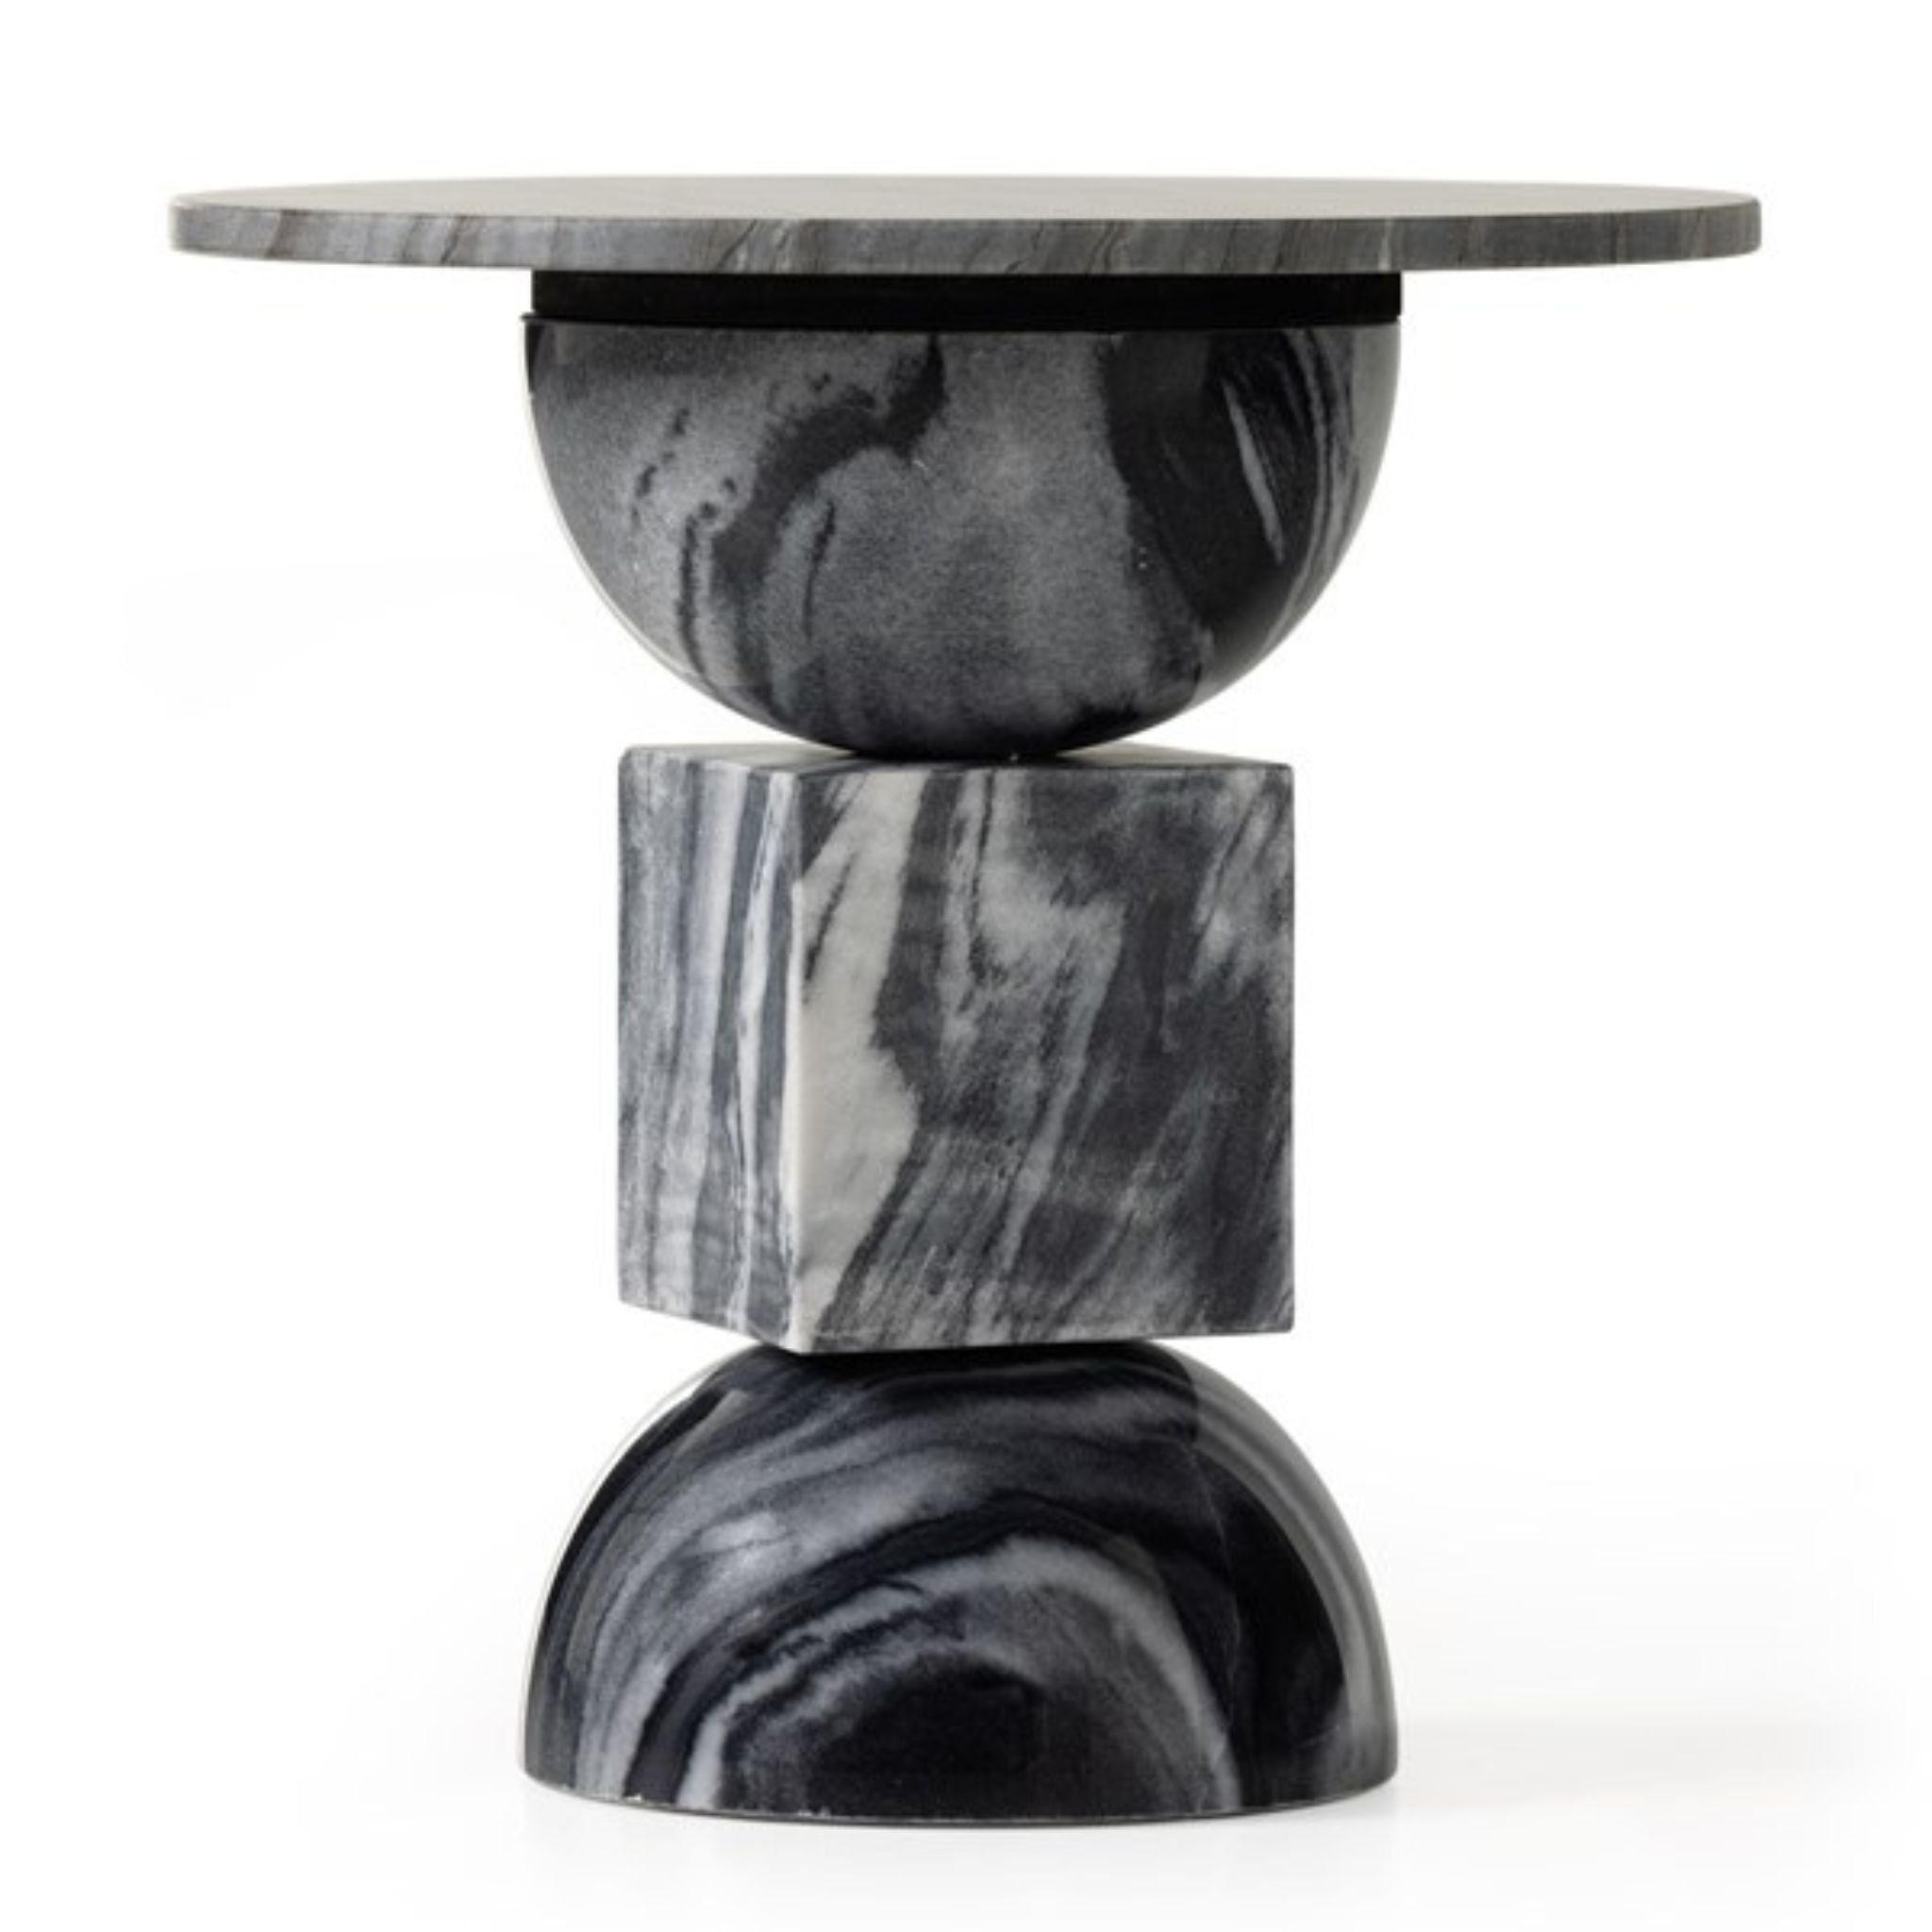 NEDA END TABLE - Simply Elevated Home Furnishings 